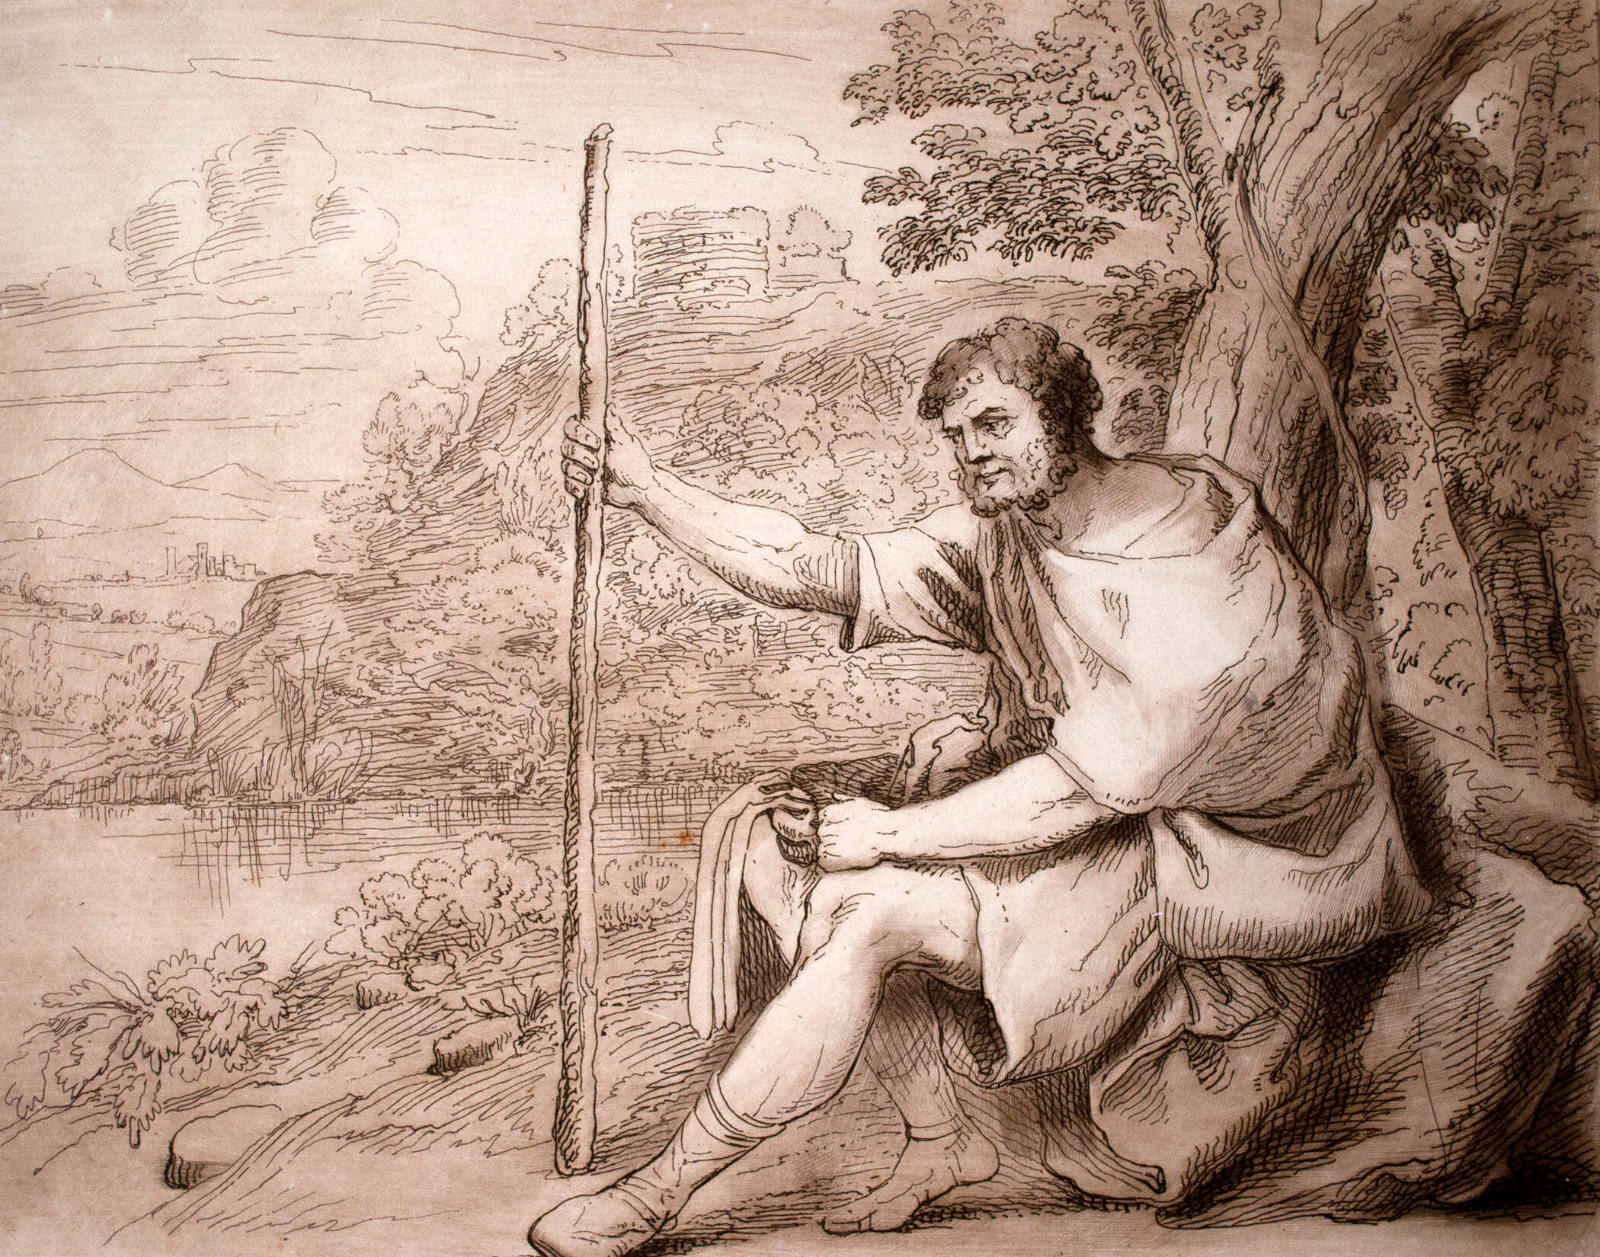 Seated Man with Staff in Landscape